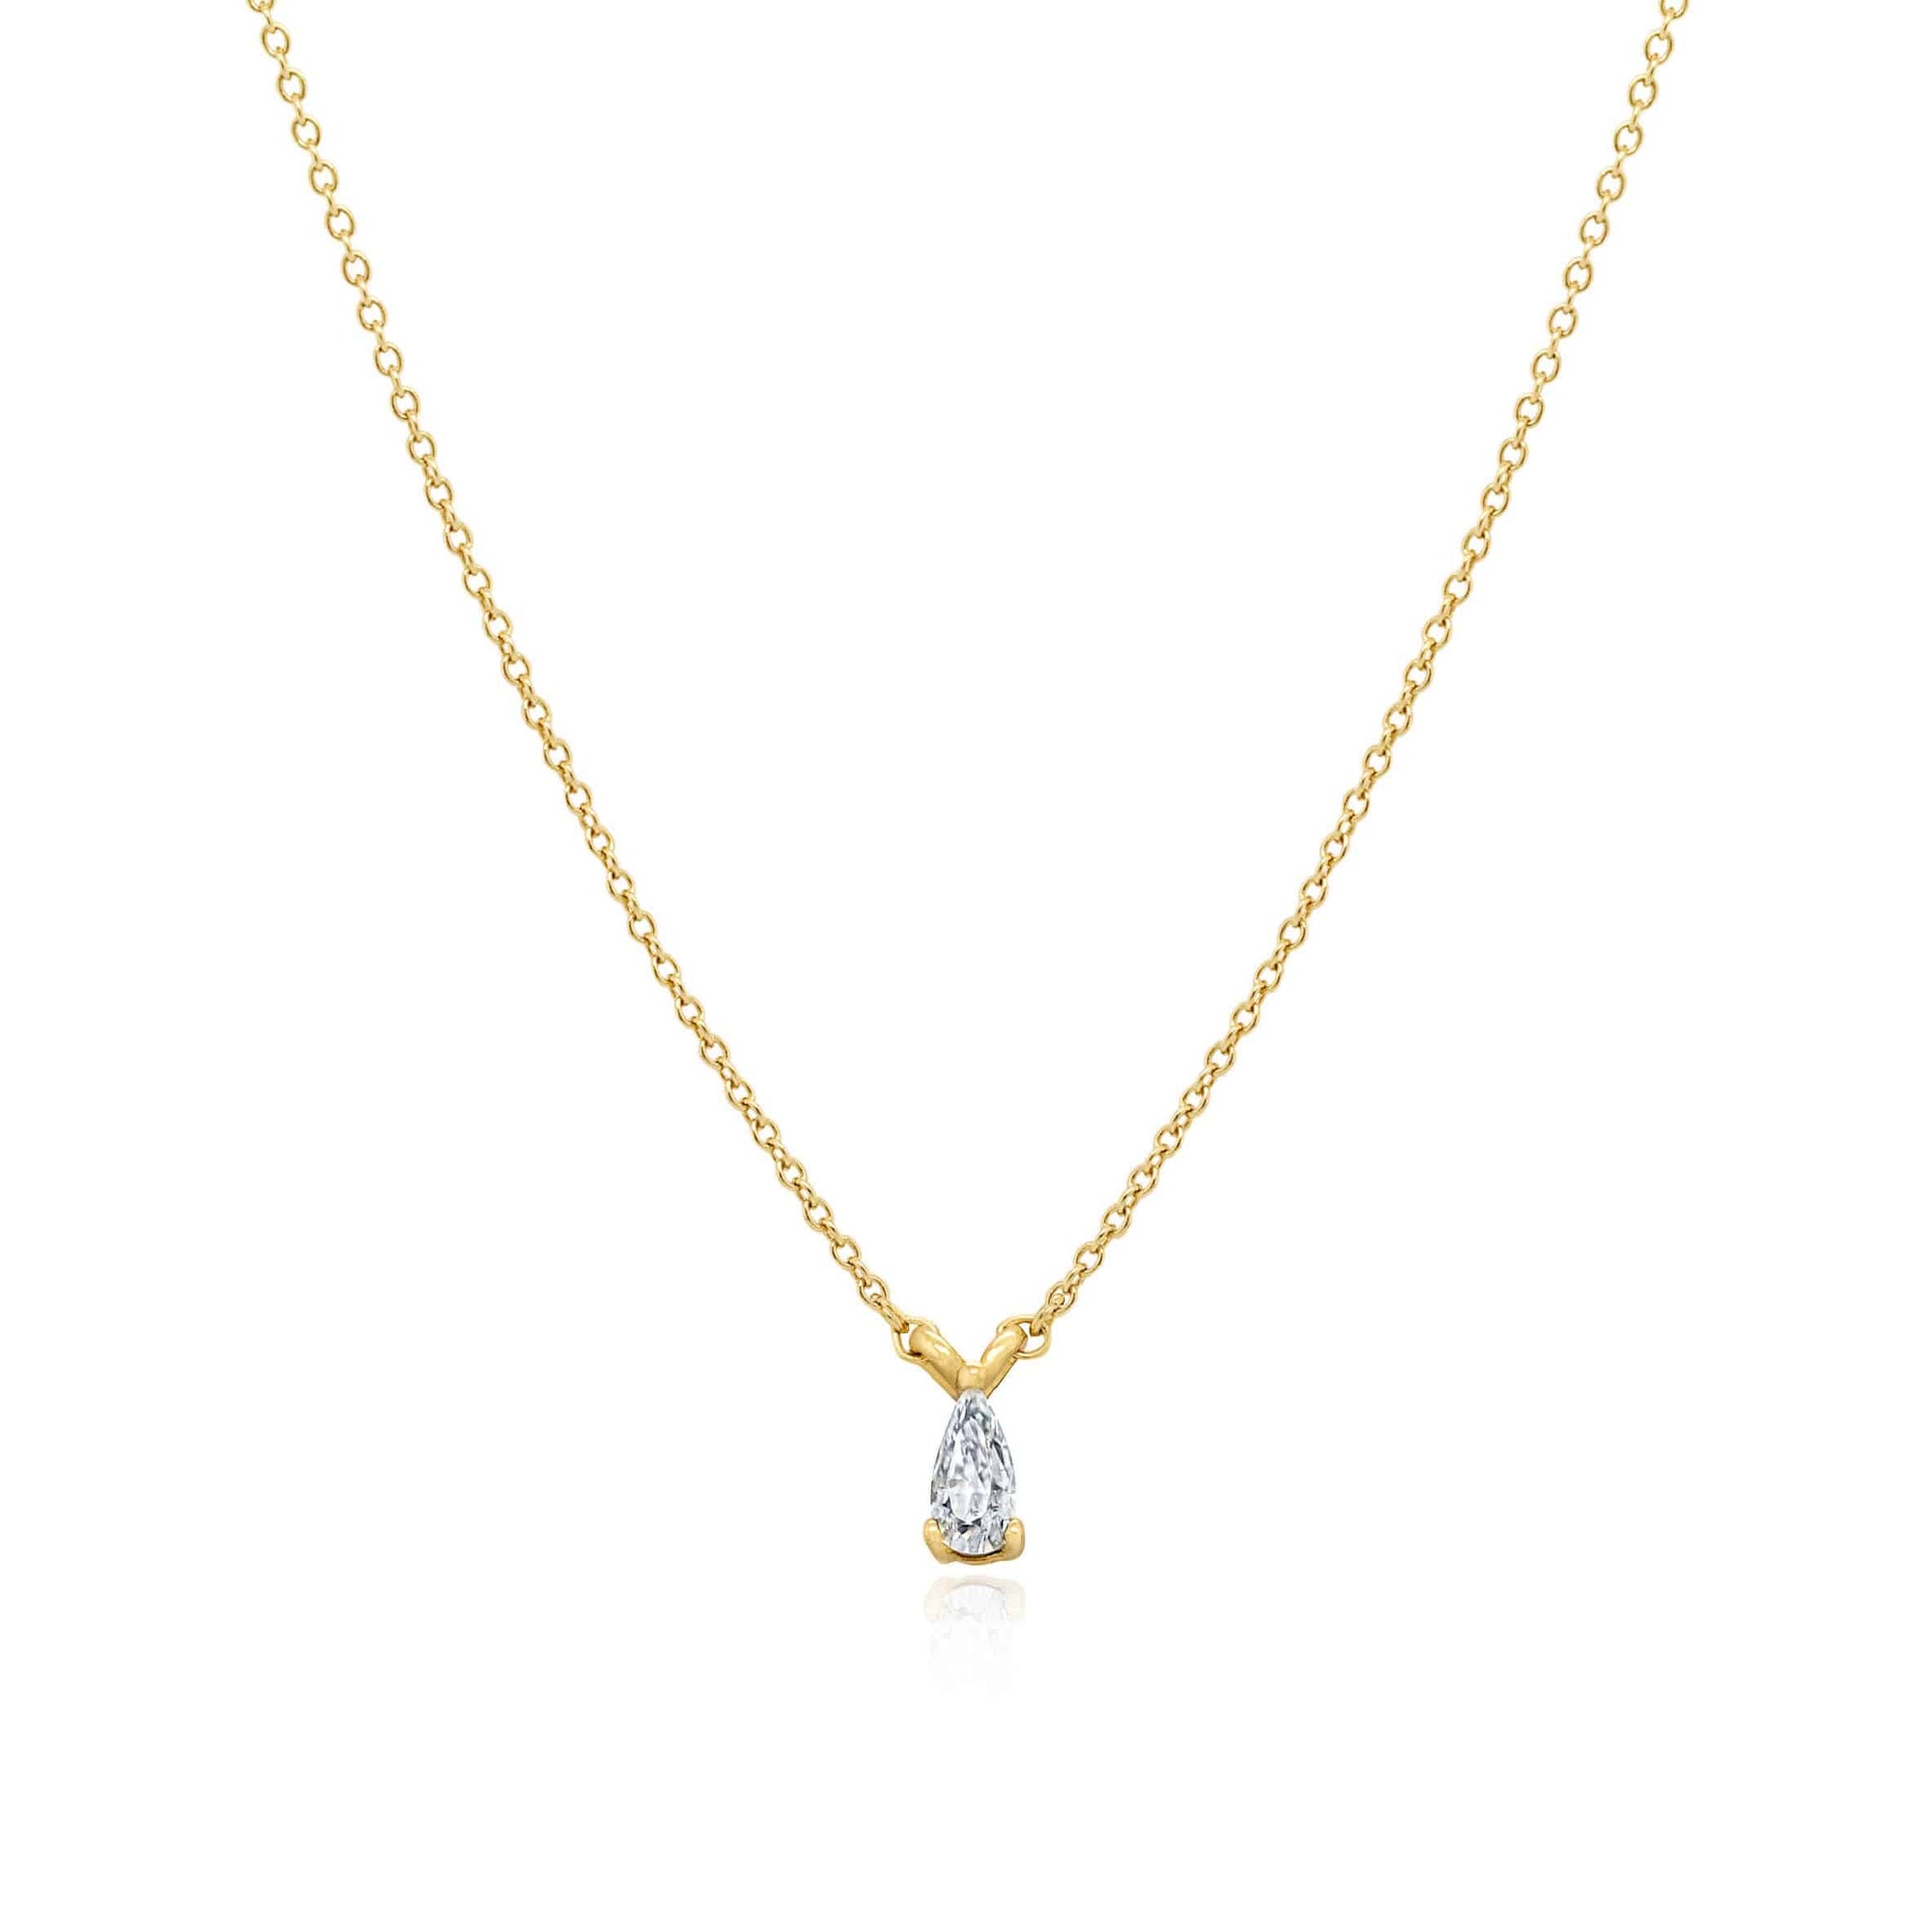 Teardrop Solitaire Pendant with Moissanite - Trove & Co.